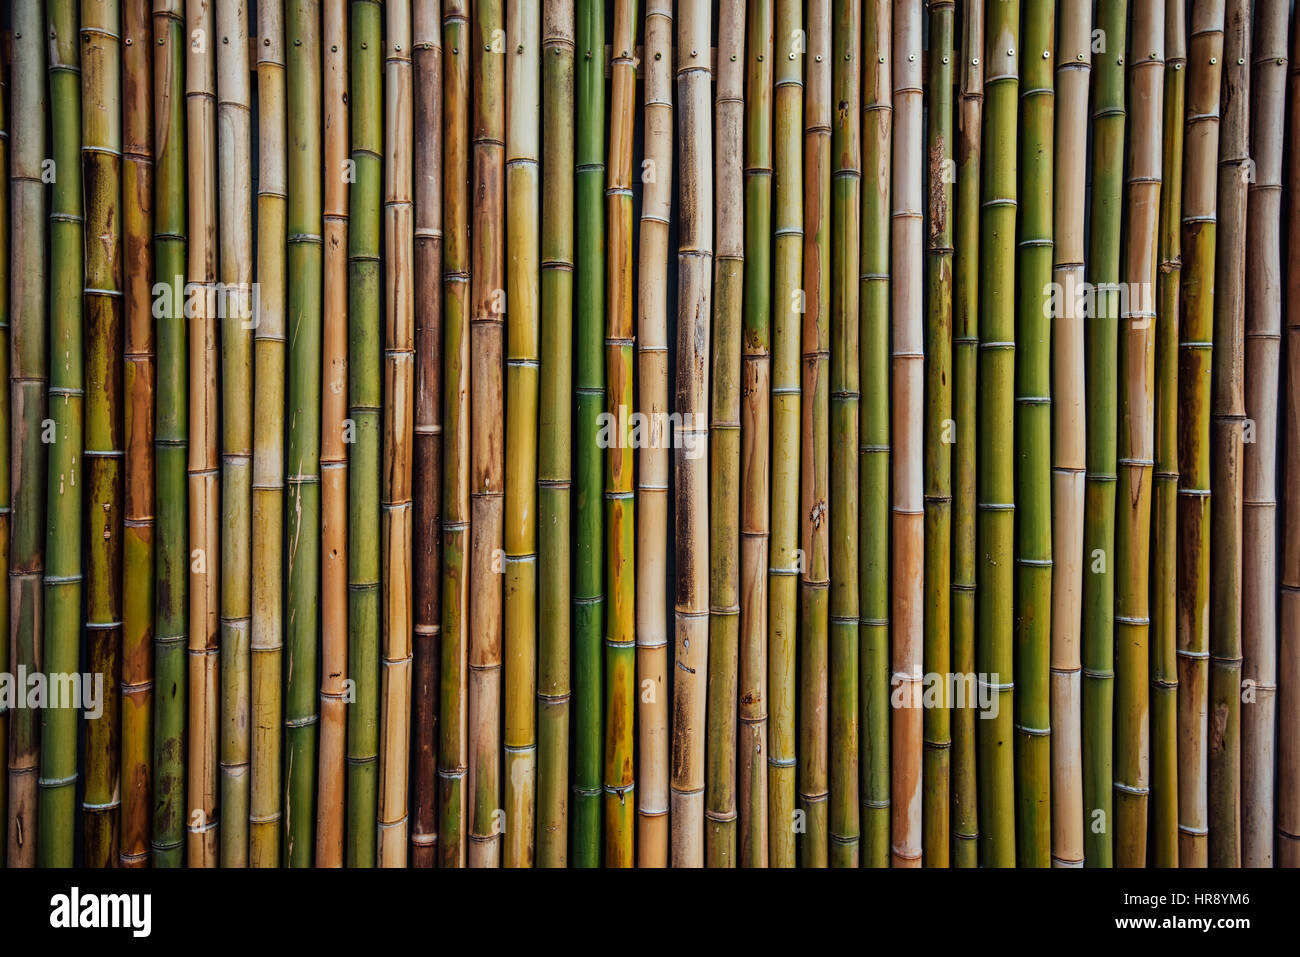 Bamboo fence background texture, dry japanese tree as natural pattern Stock Photo